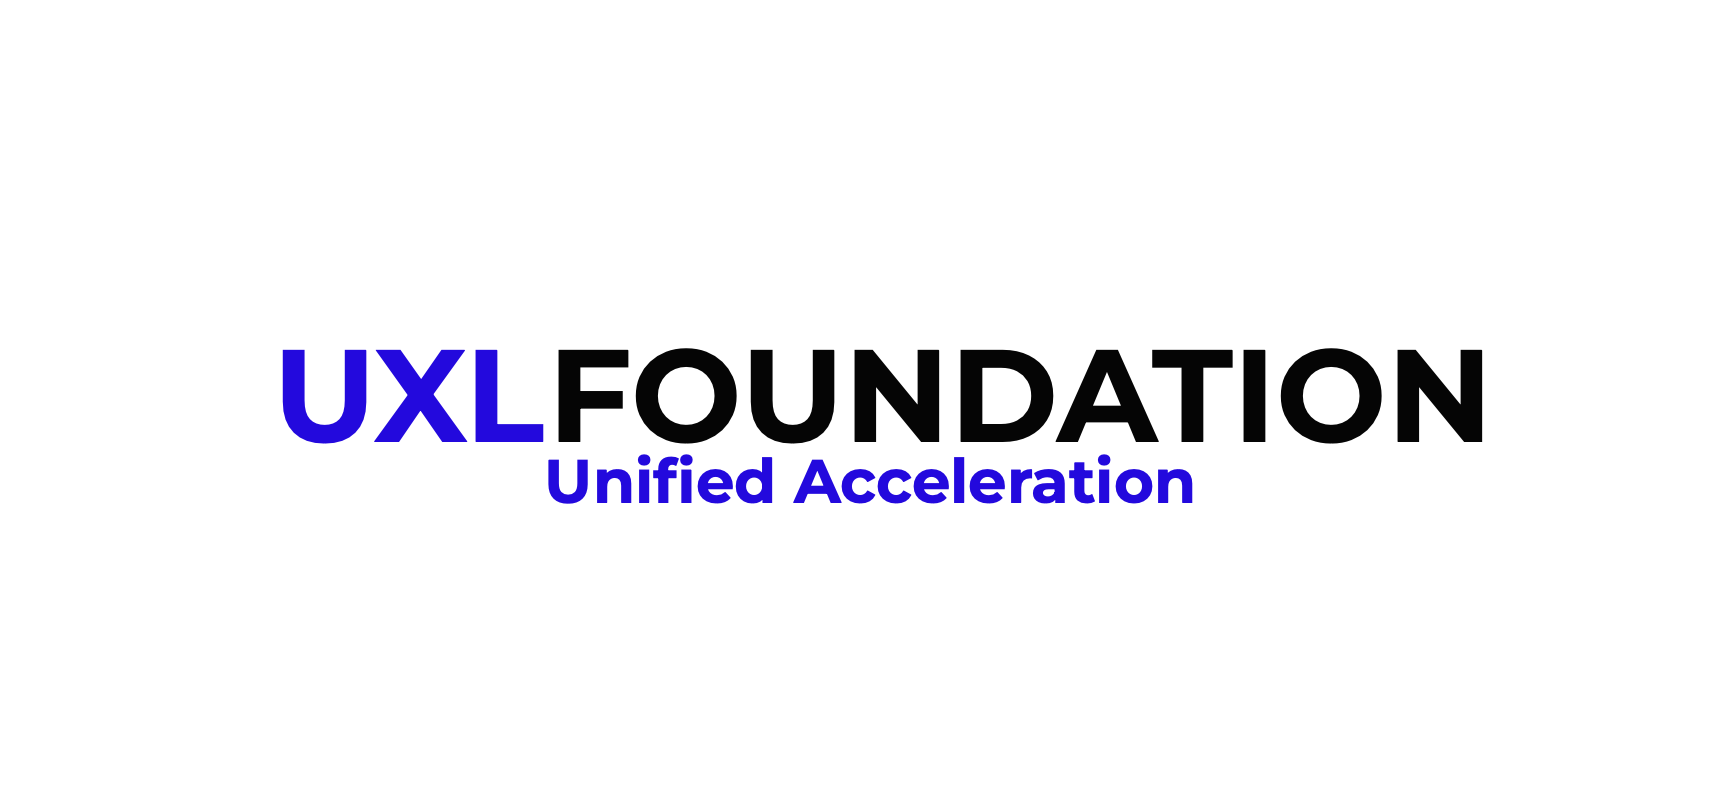 Announcing the Unified Acceleration (UXL) Foundation Image